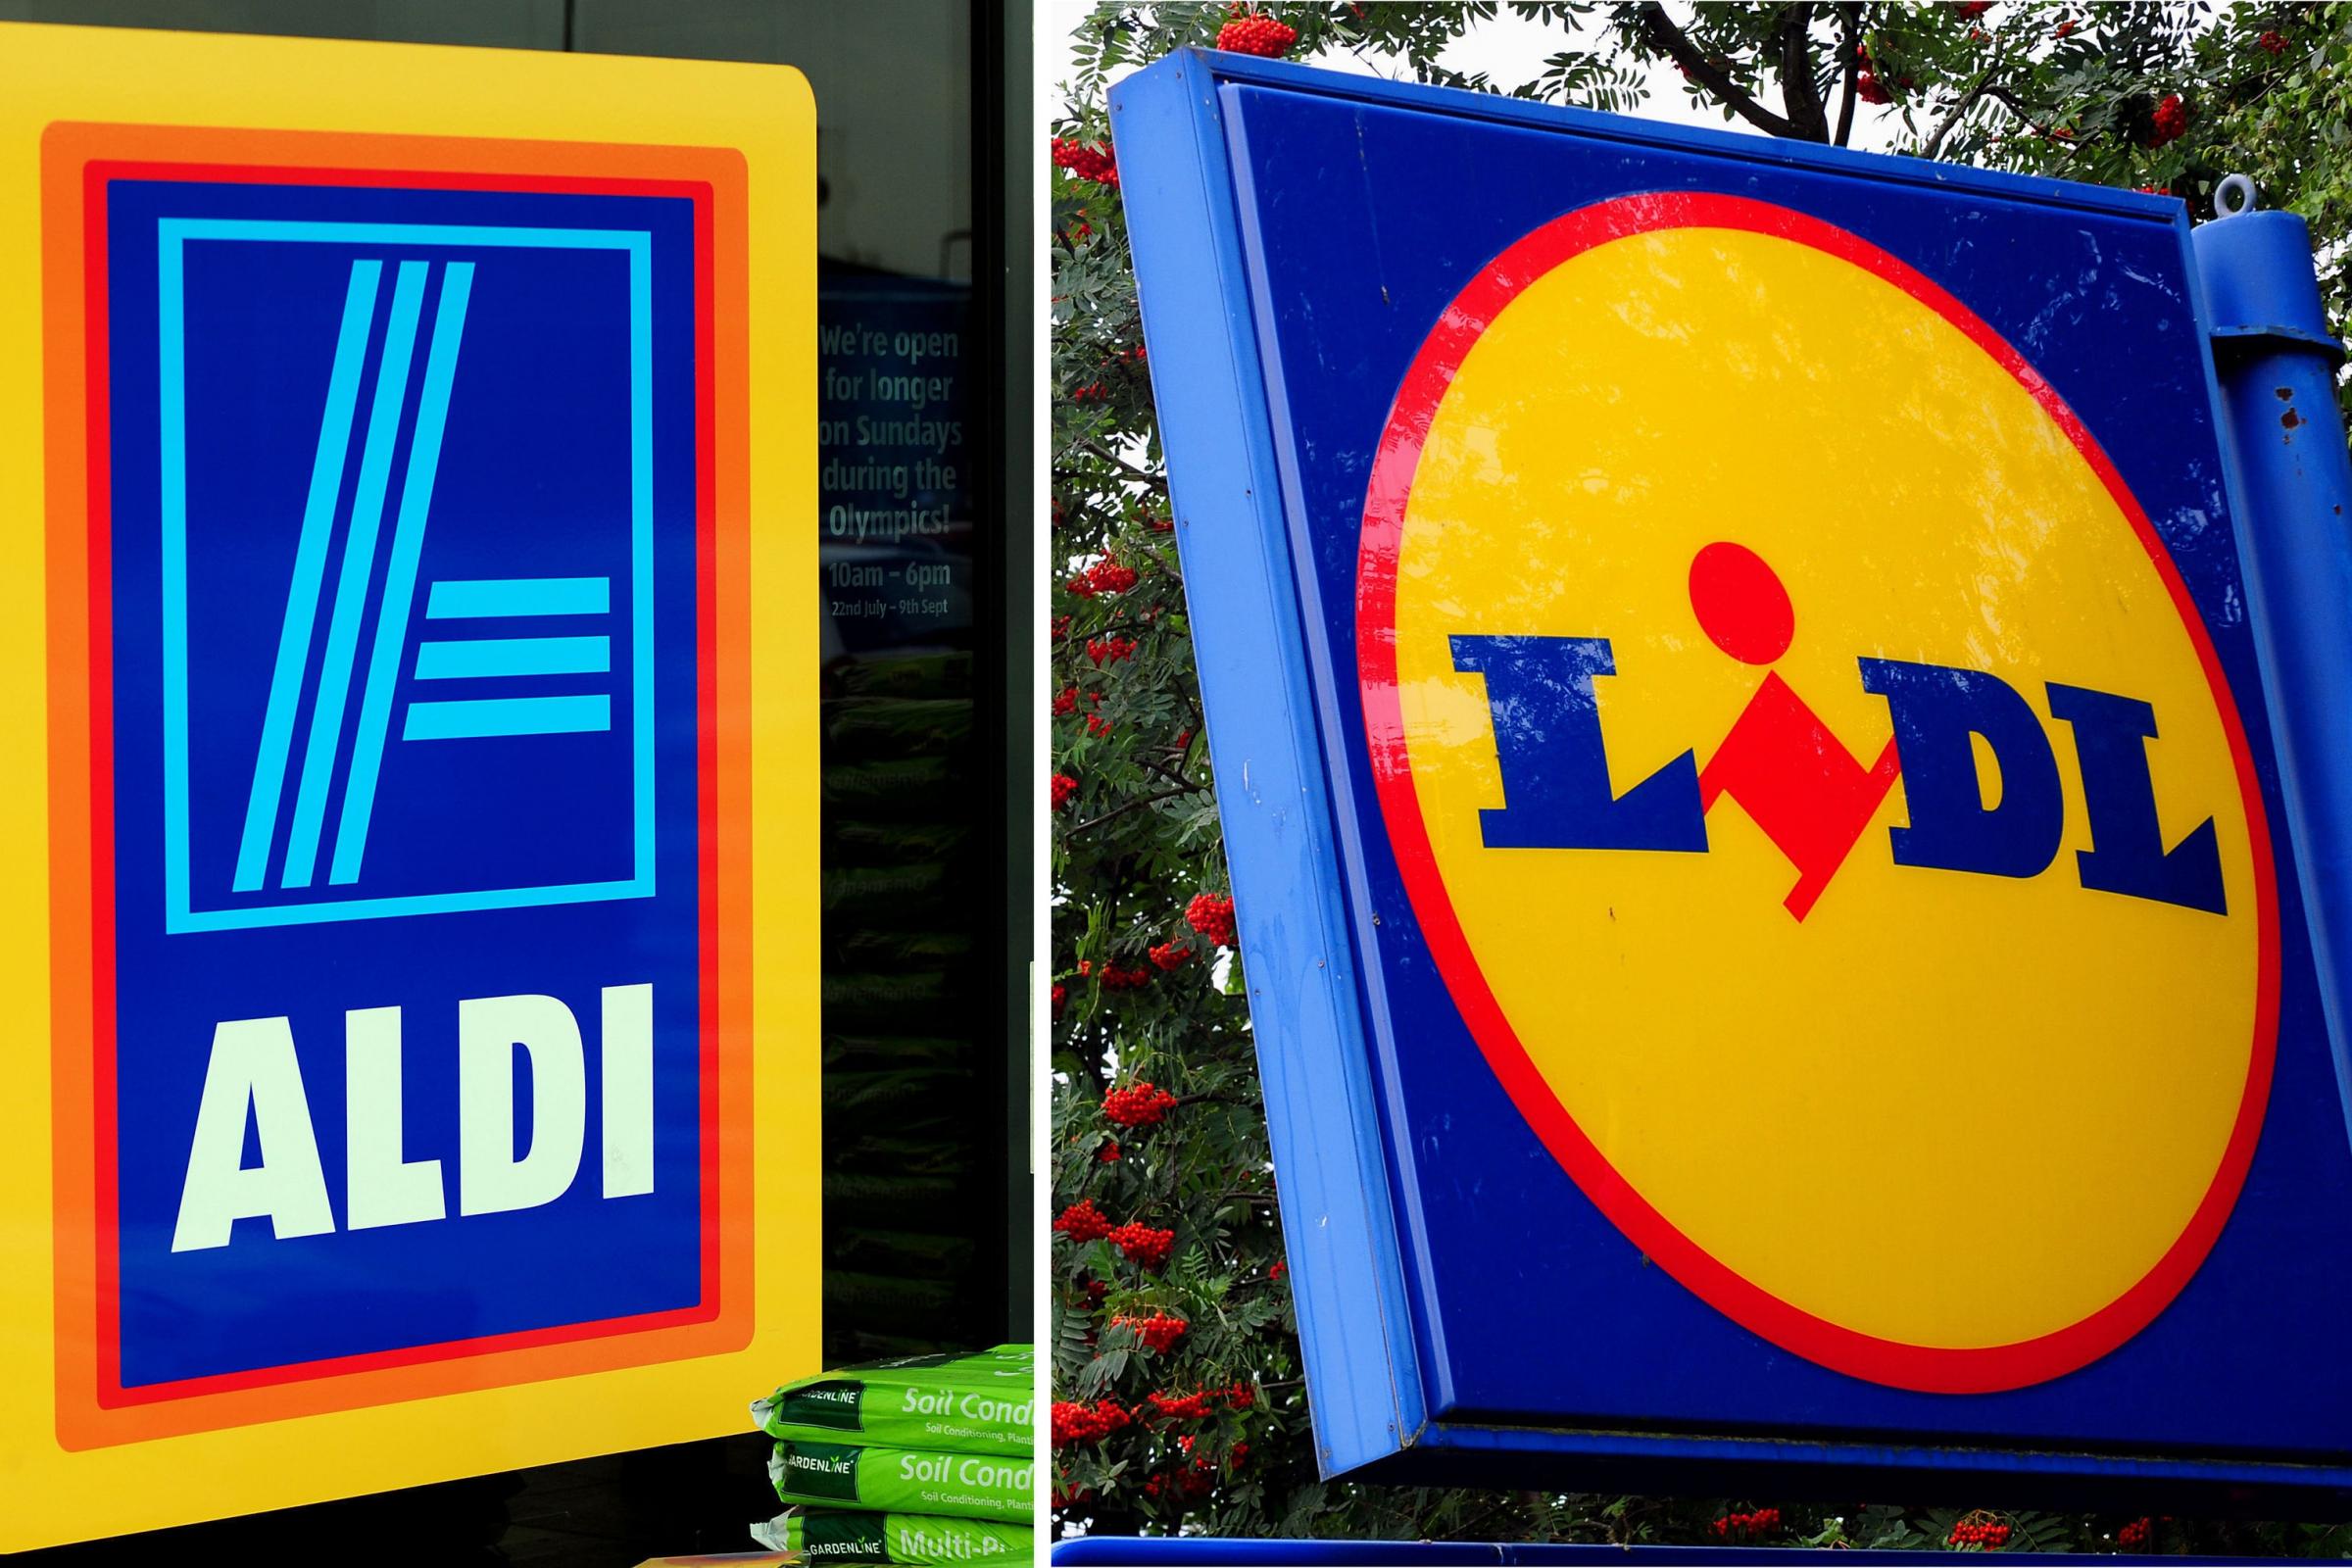 Bargain hunter: What's hot in the Middle of Lidl and Aldi this weekend?